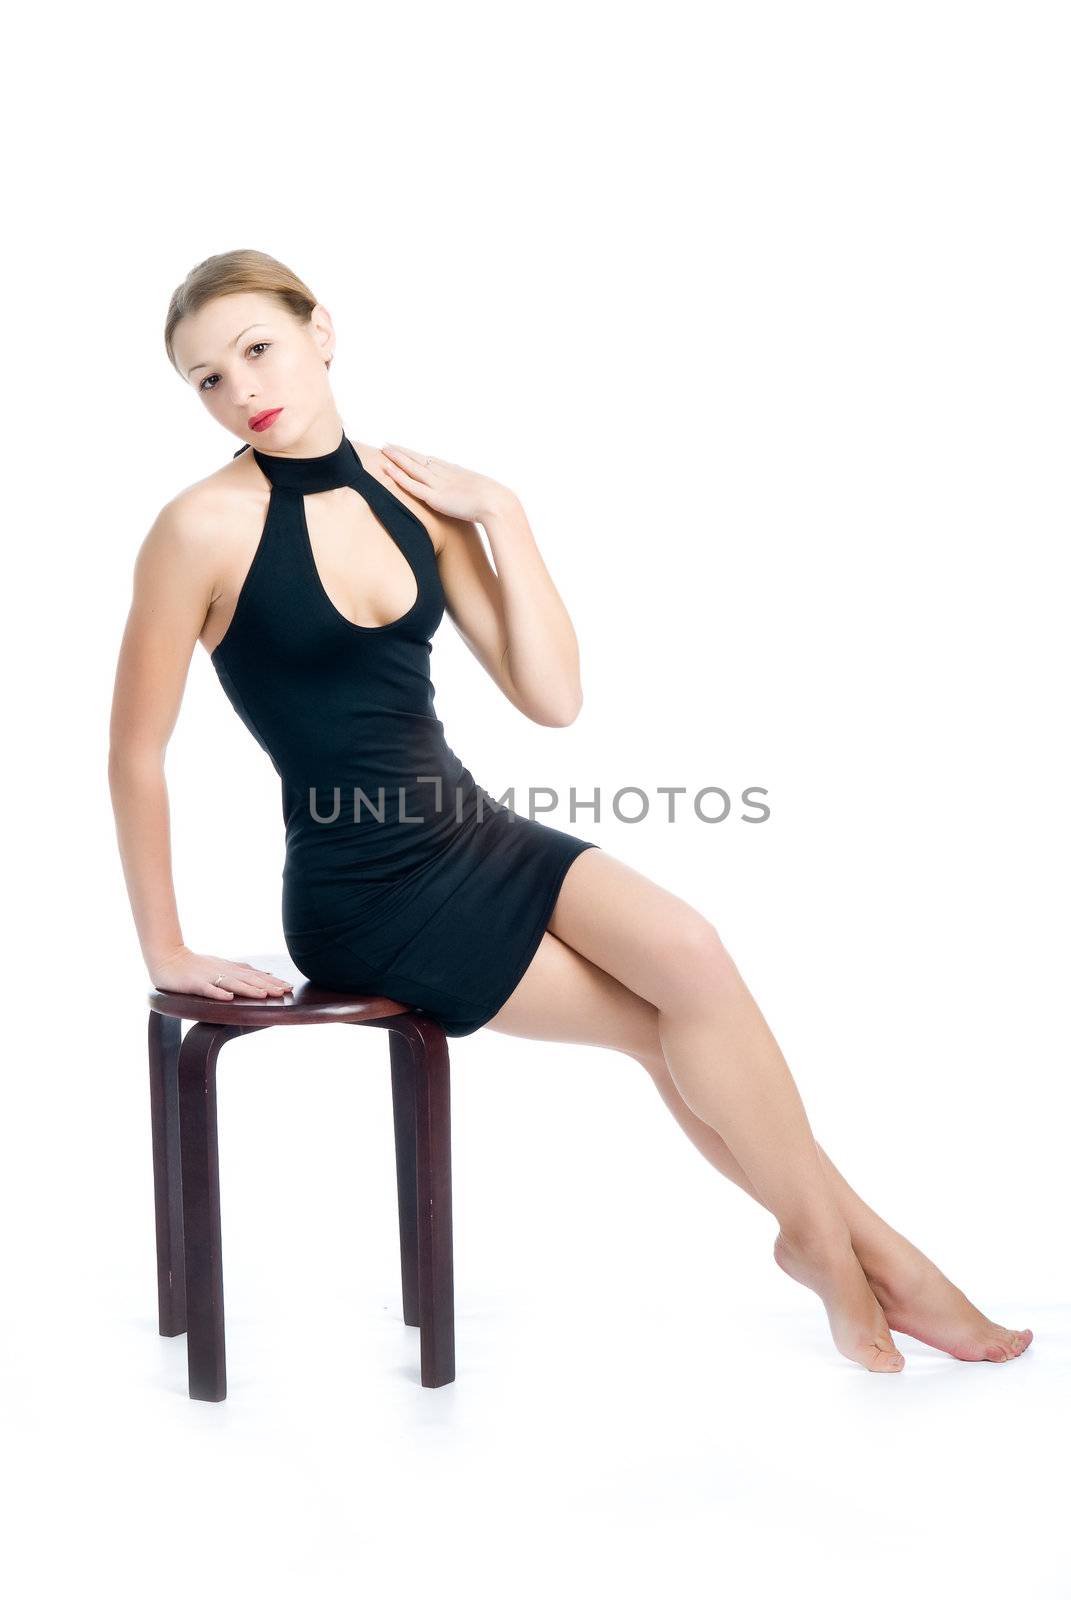 Business woman posing on a white background